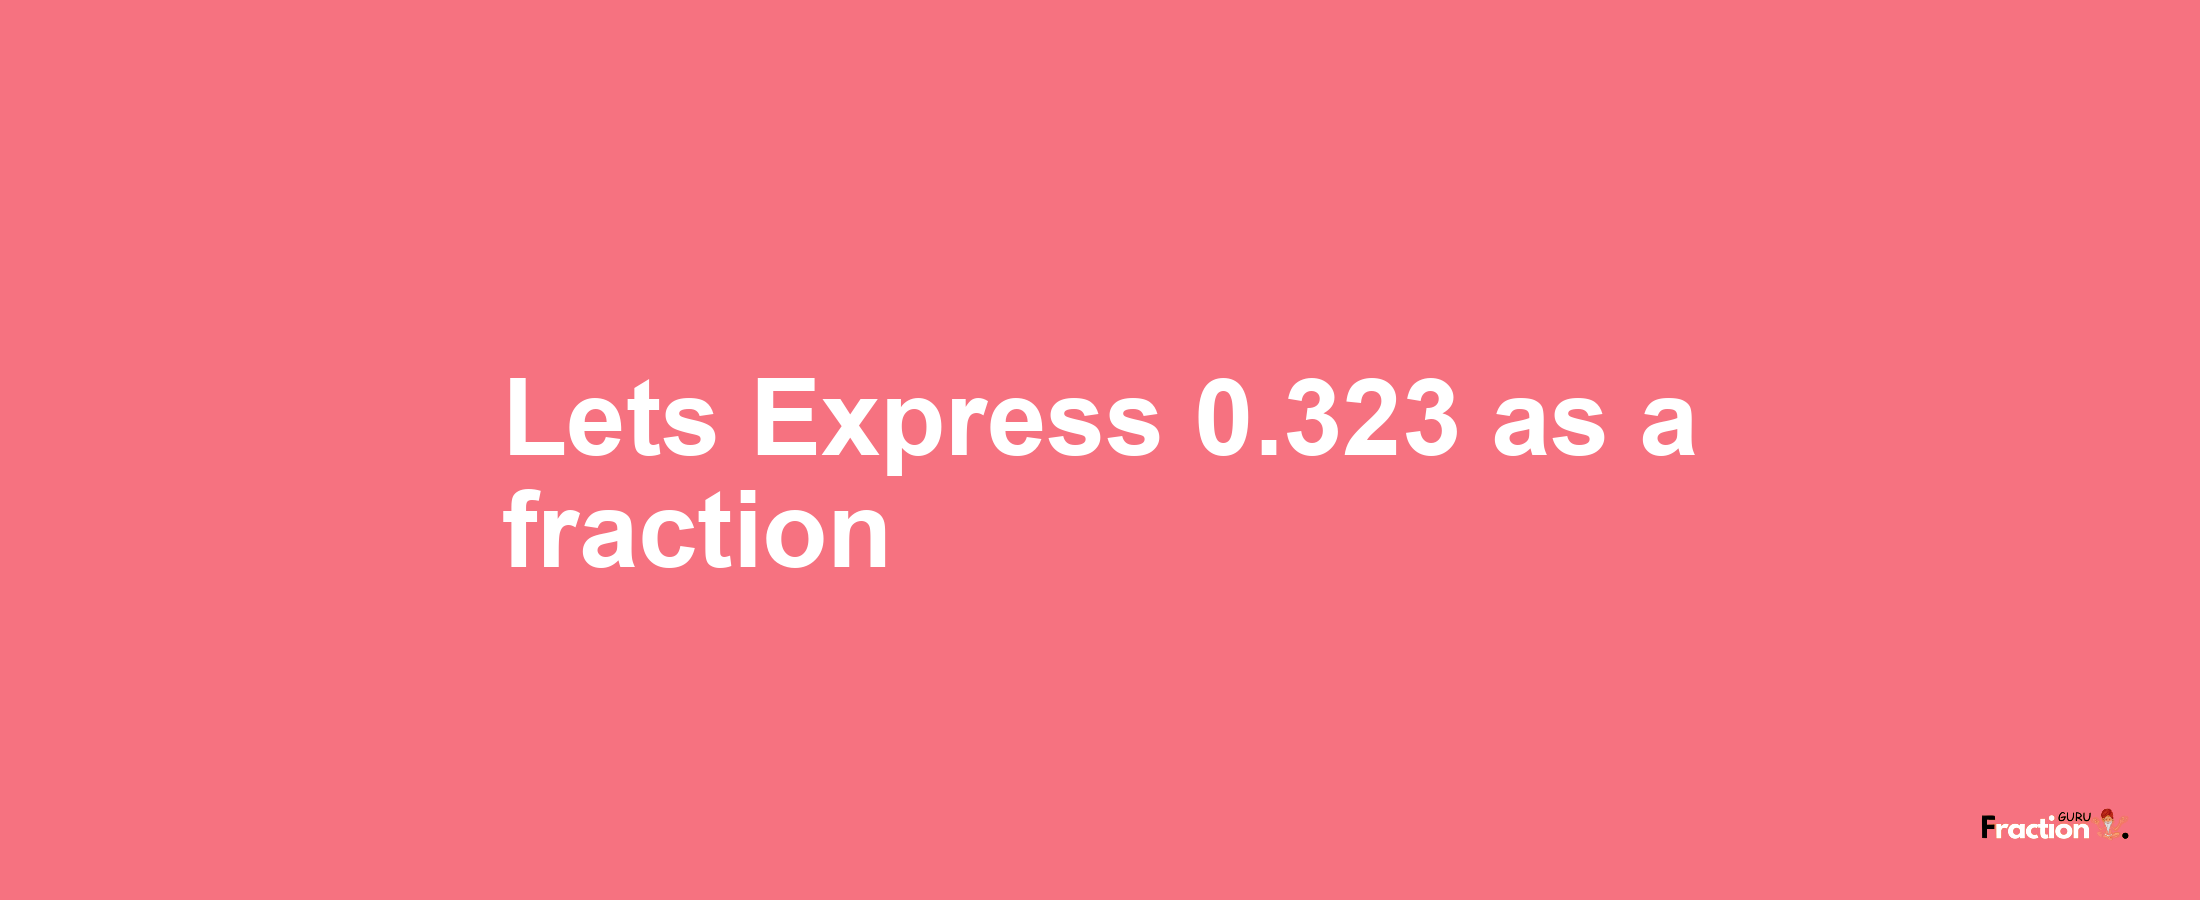 Lets Express 0.323 as afraction